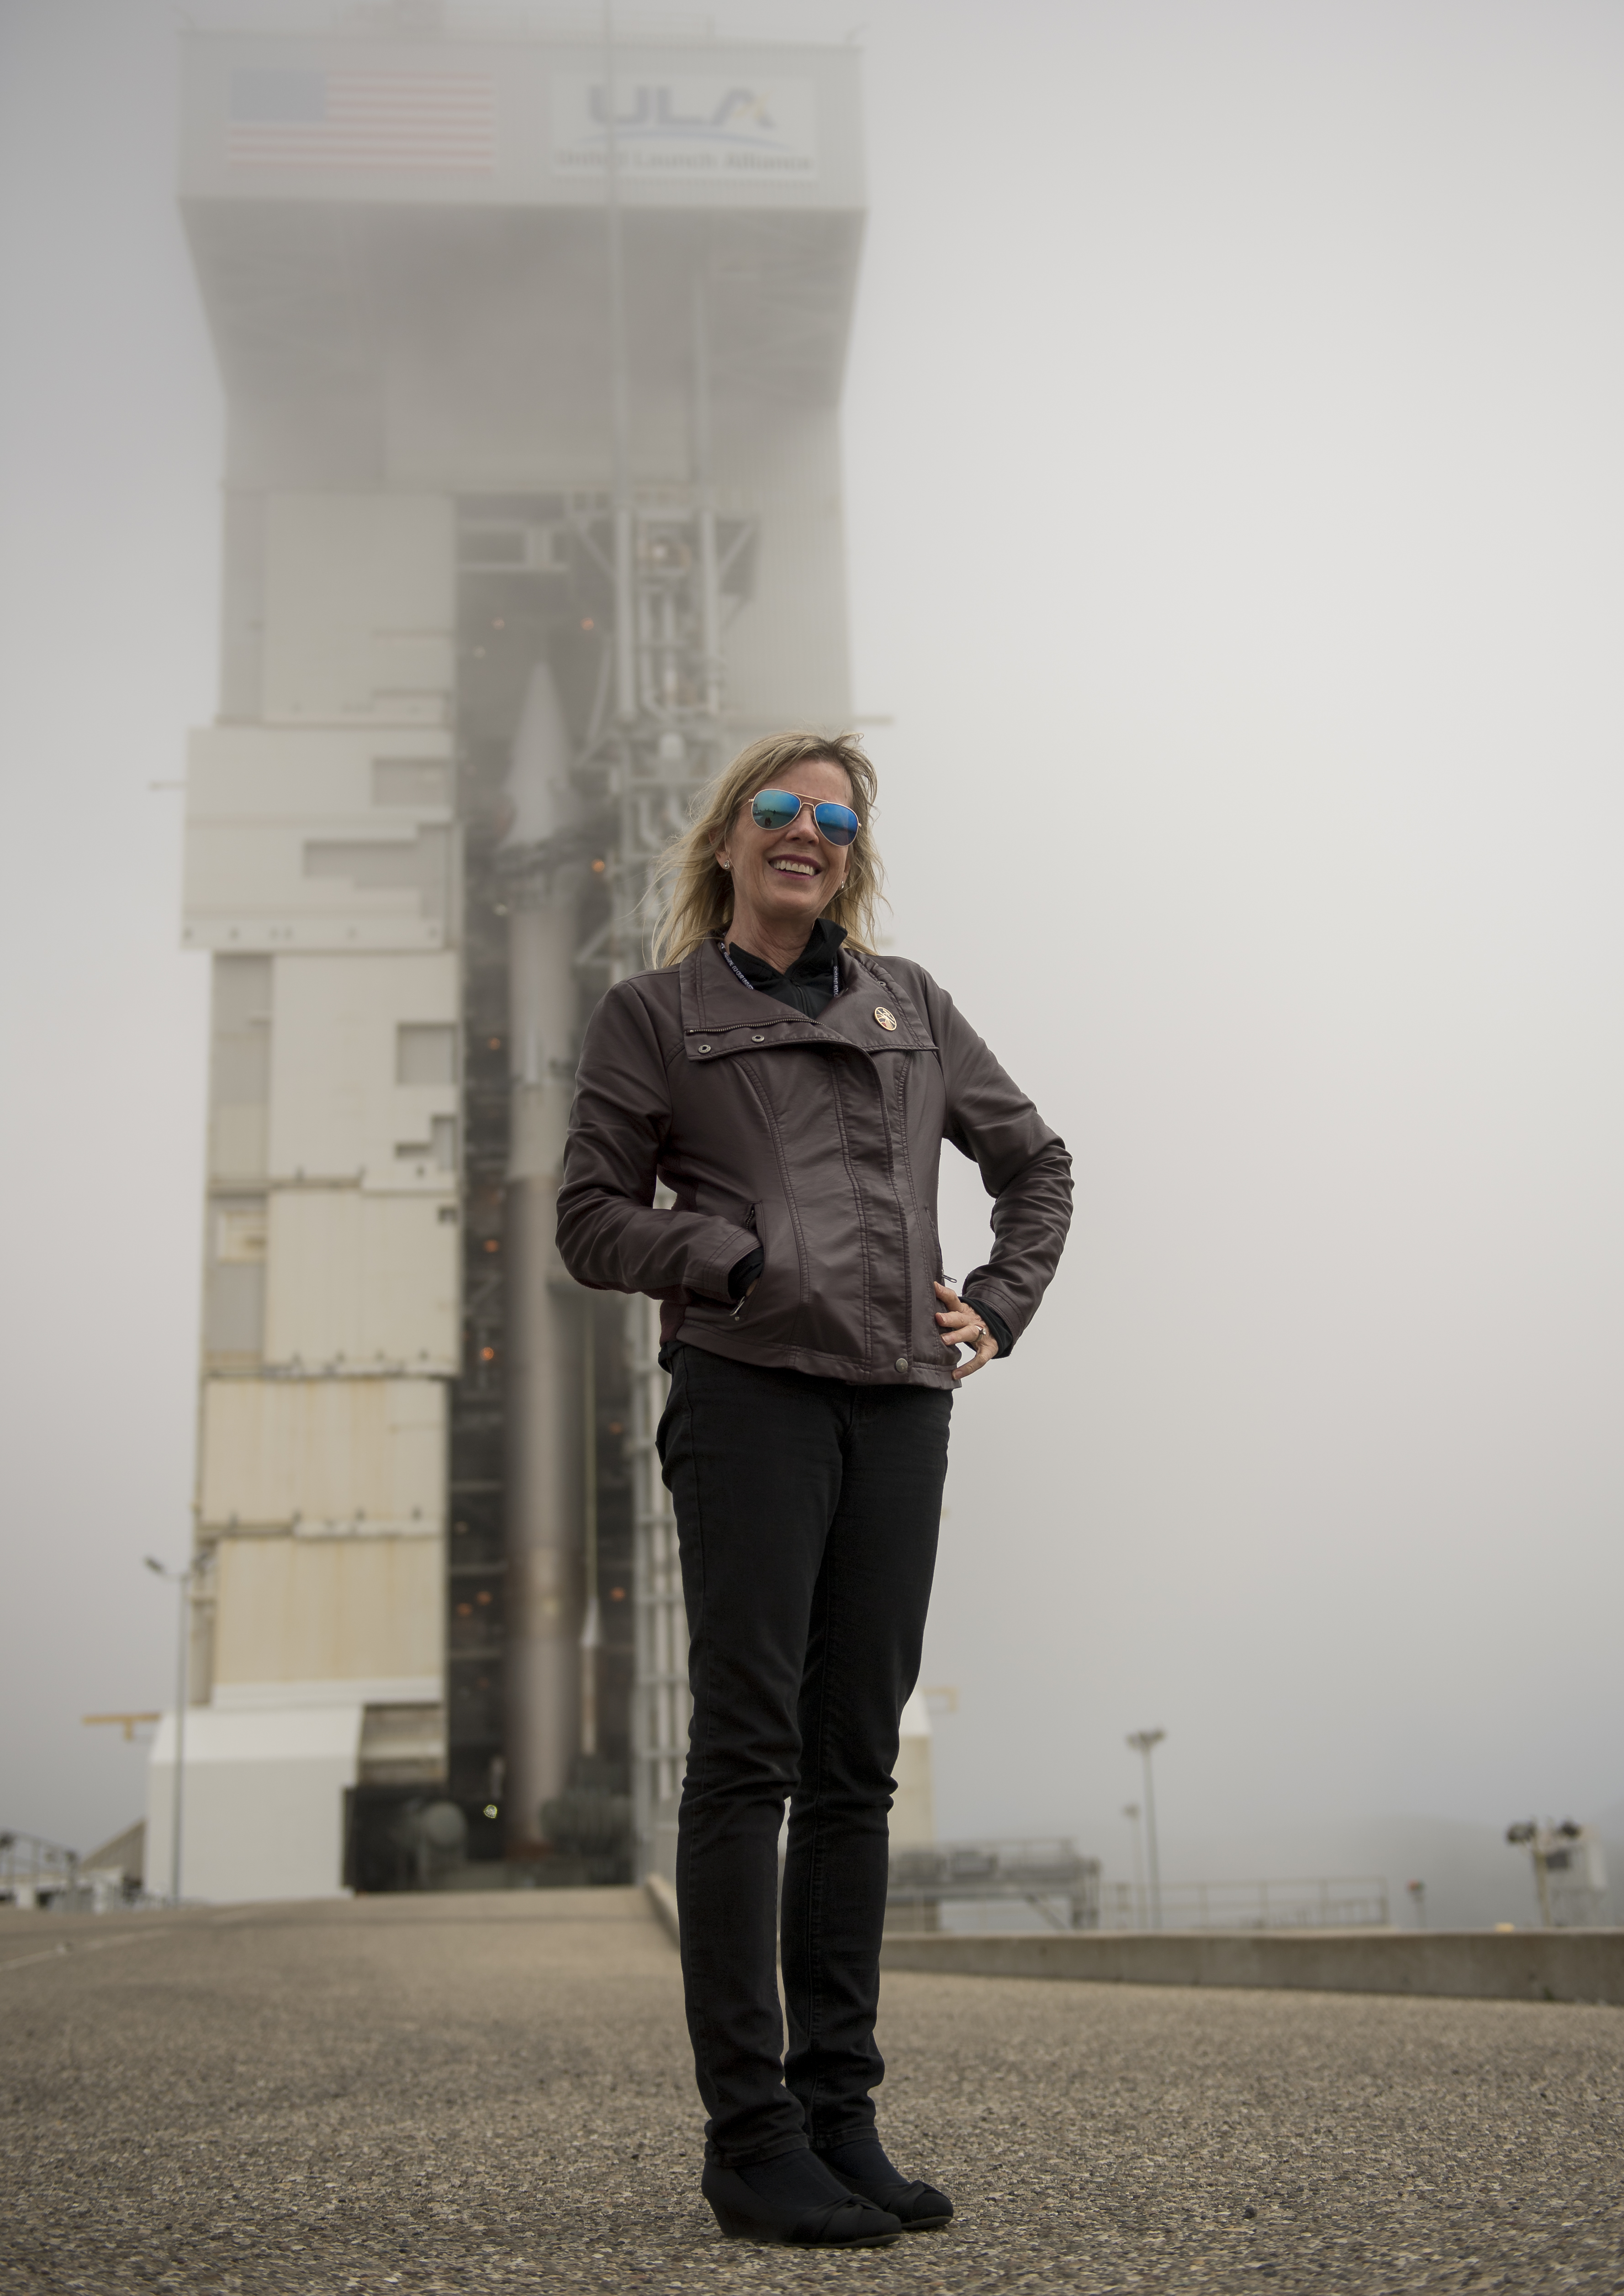 Woman standing in front of rocket on launch pad.